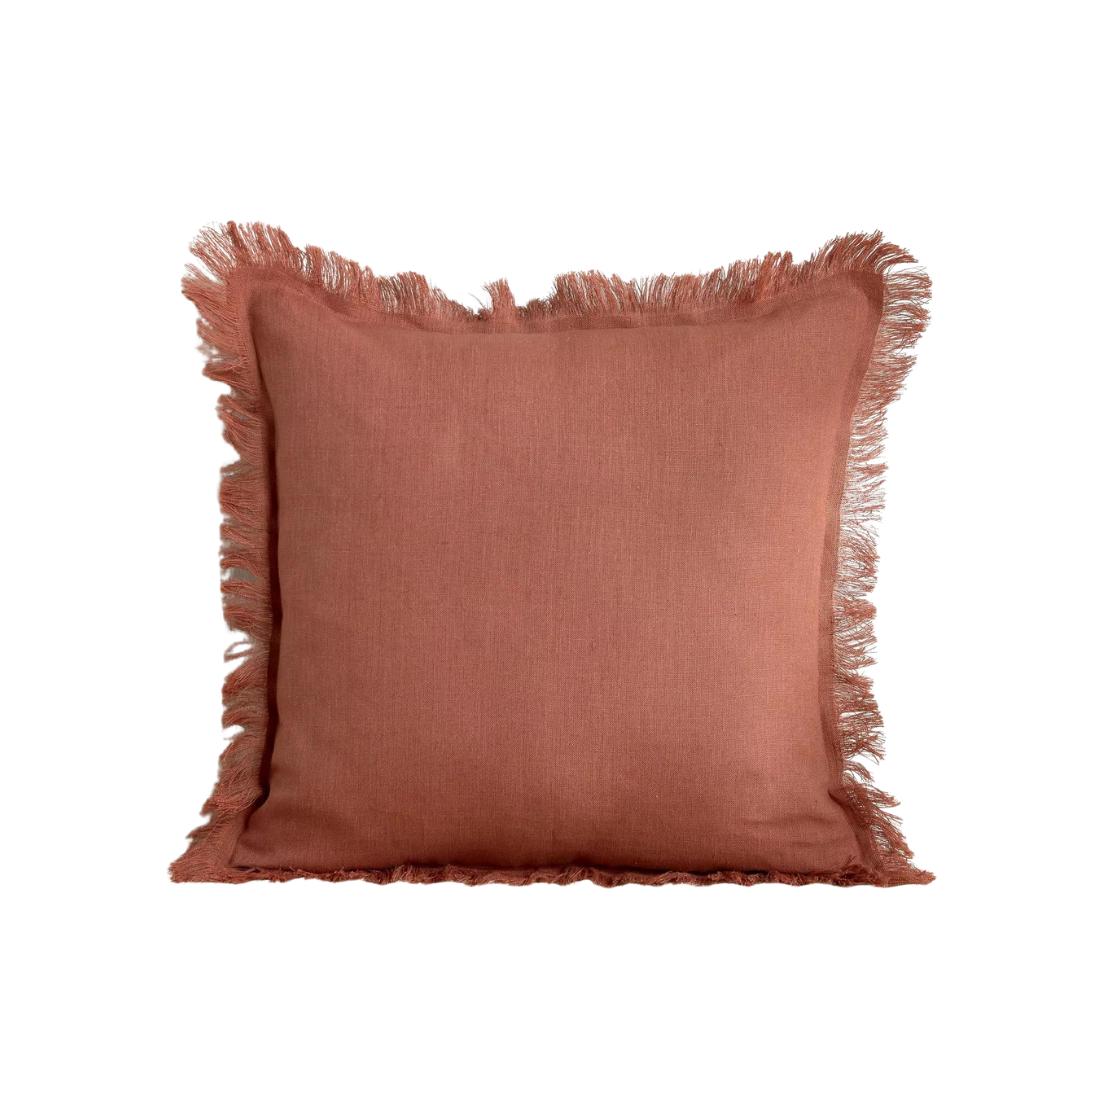 Rust Linen Cushion with Fringes